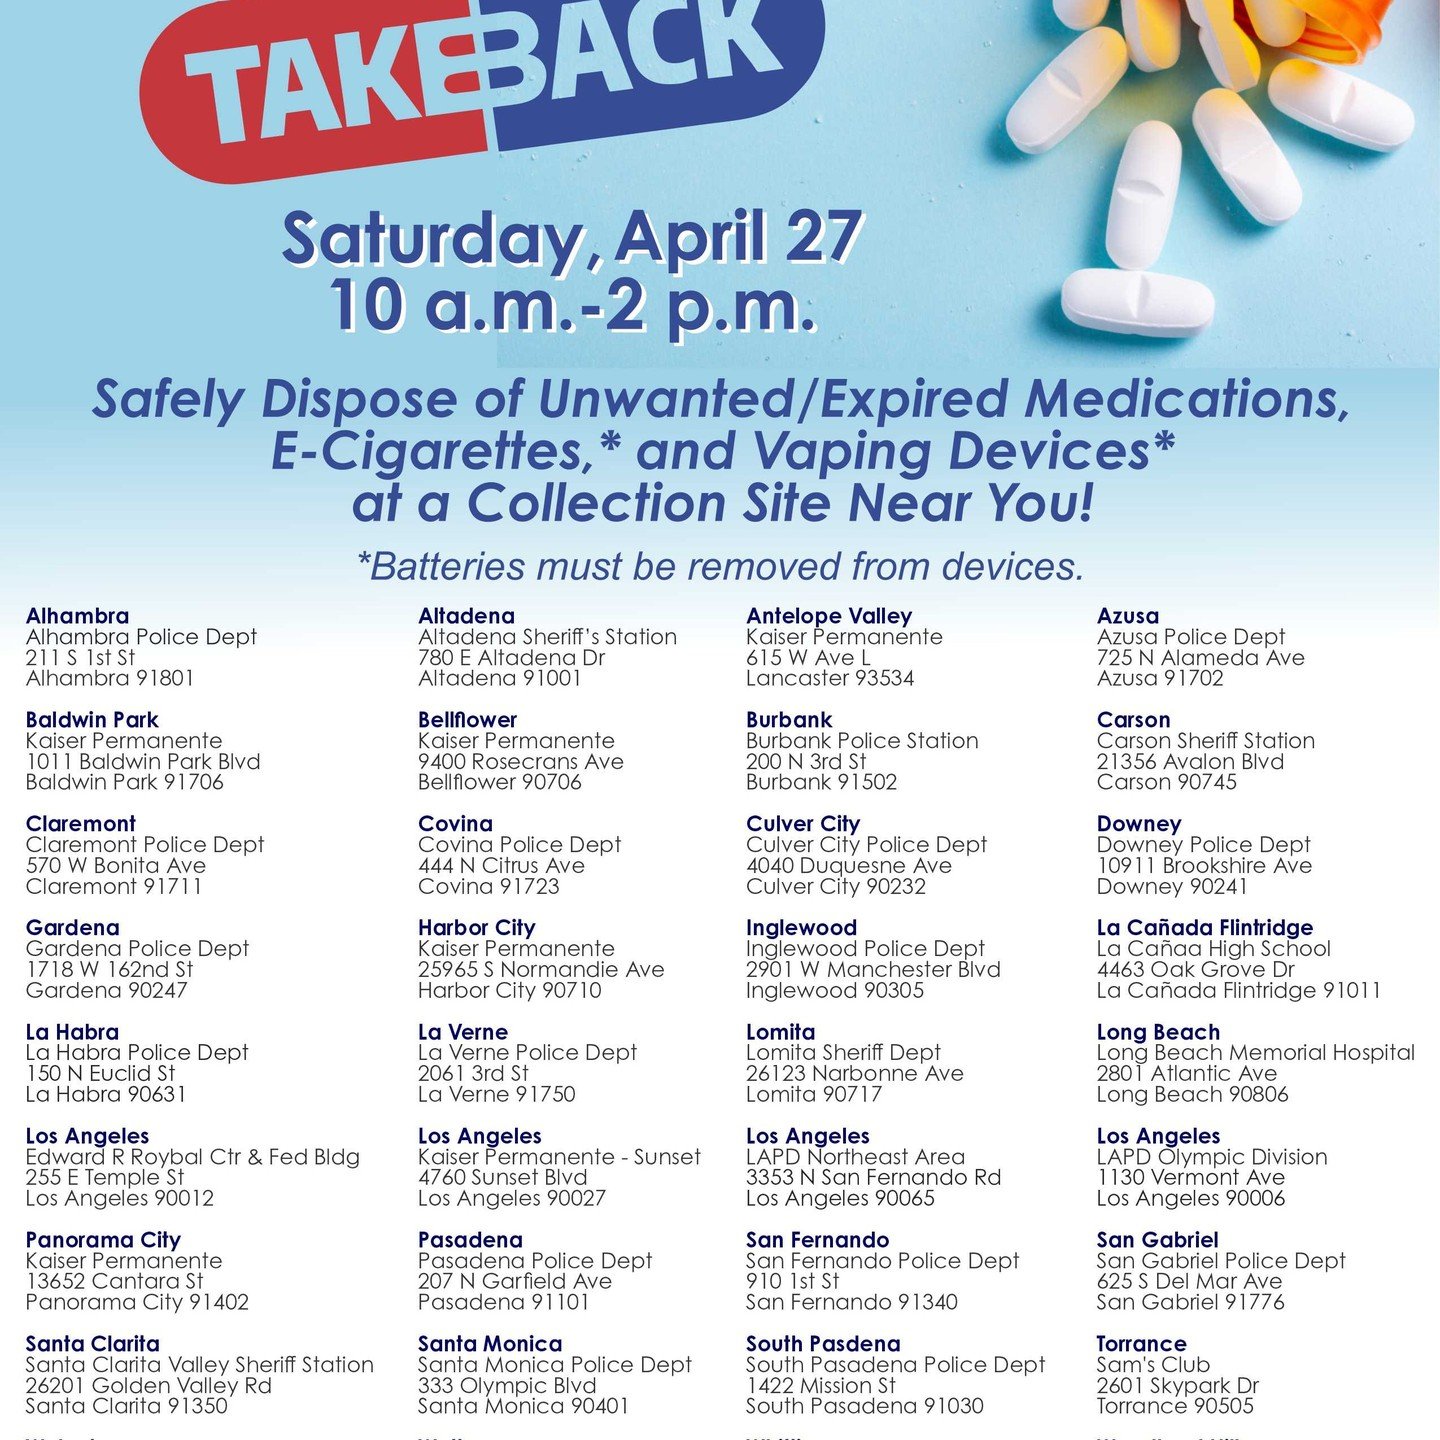 It is important to safely dispose of any unwanted or expired medication. Taking a prescription drug not as the intended user or for the intended purpose can lead to drug abuse.
On April 27th, you can visit your local RX Takeback location from 10:00 A